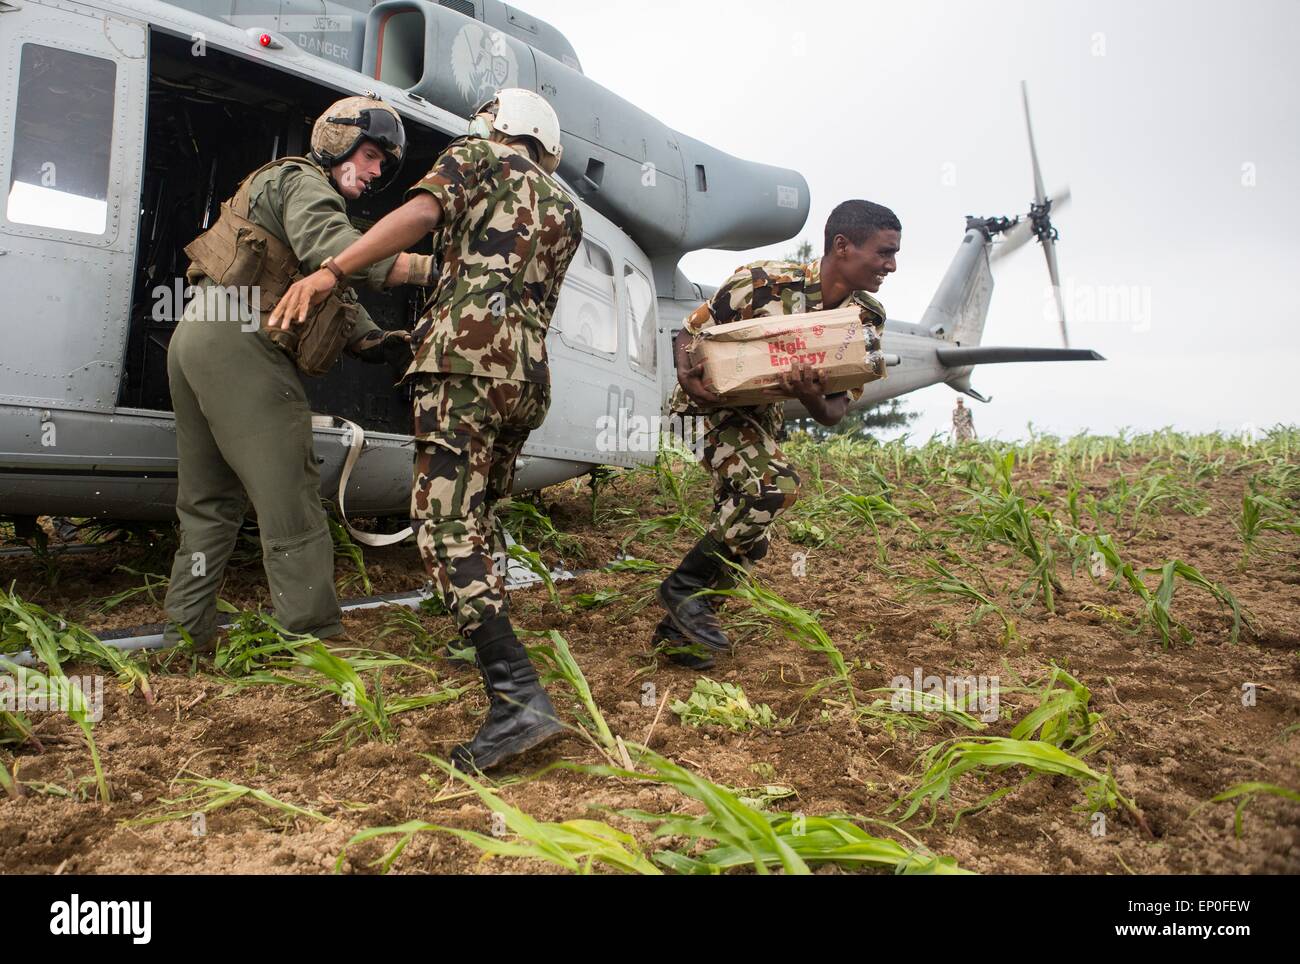 Kathmandu, Nepal. 10th May, 2015. Nepalese military service members unload supplies from a U.S. Marine UH-1Y Huey helicopter during a aid relief mission into remote areas following massive earthquakes that struck the mountain kingdom May 11, 2014 in Kavrepalanchowk District, Nepal. Stock Photo